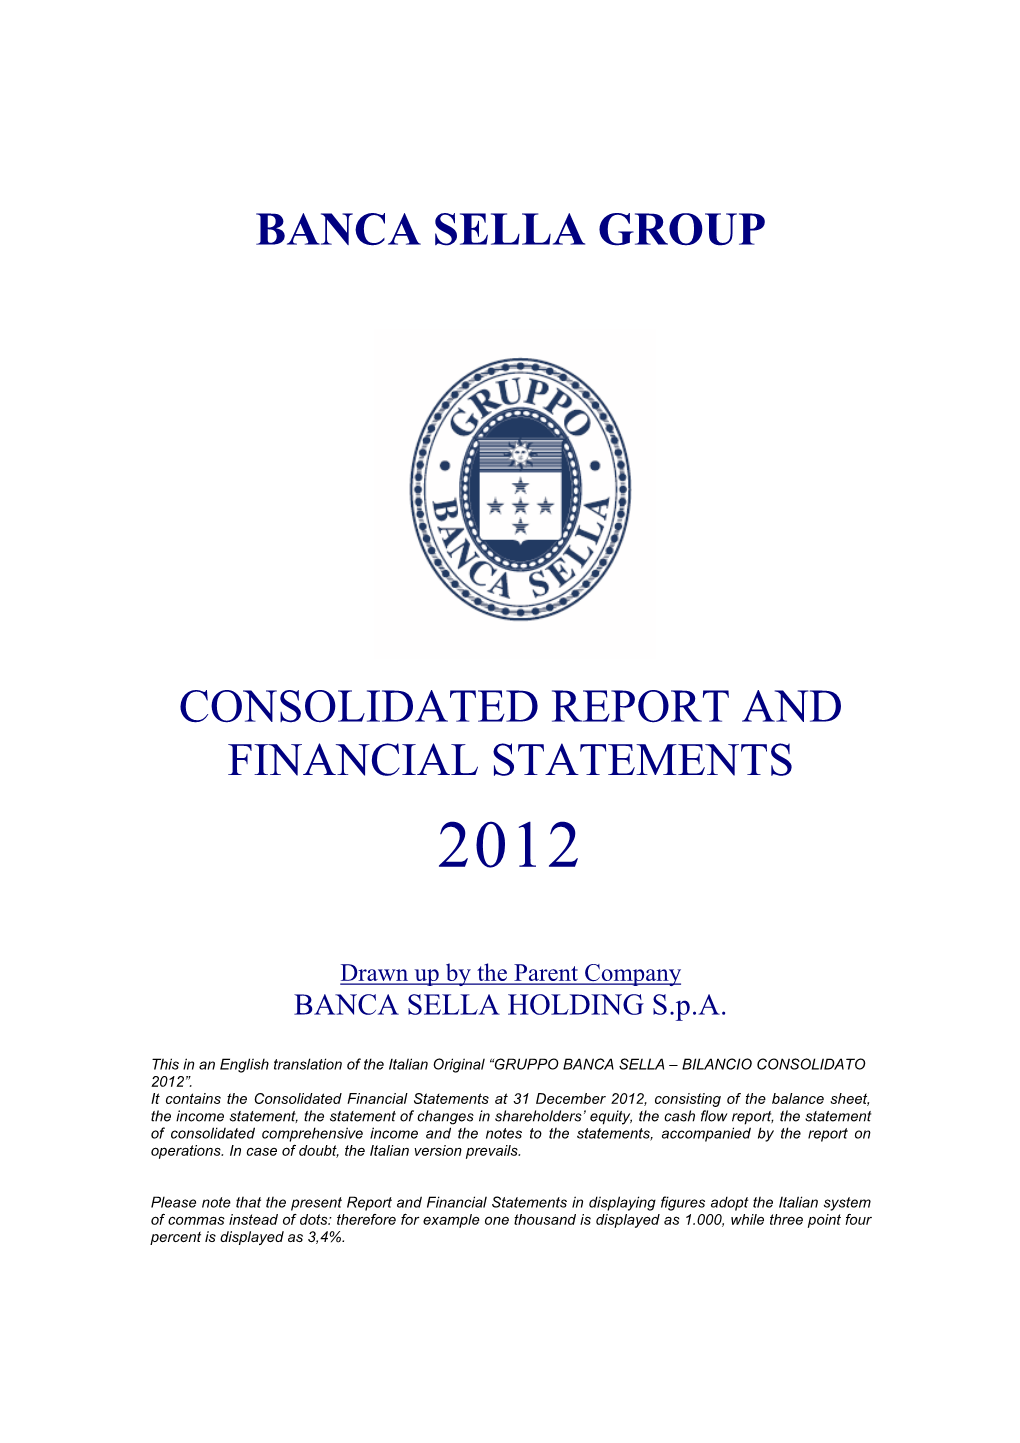 Banca Sella Group Consolidated Report and Financial Statements